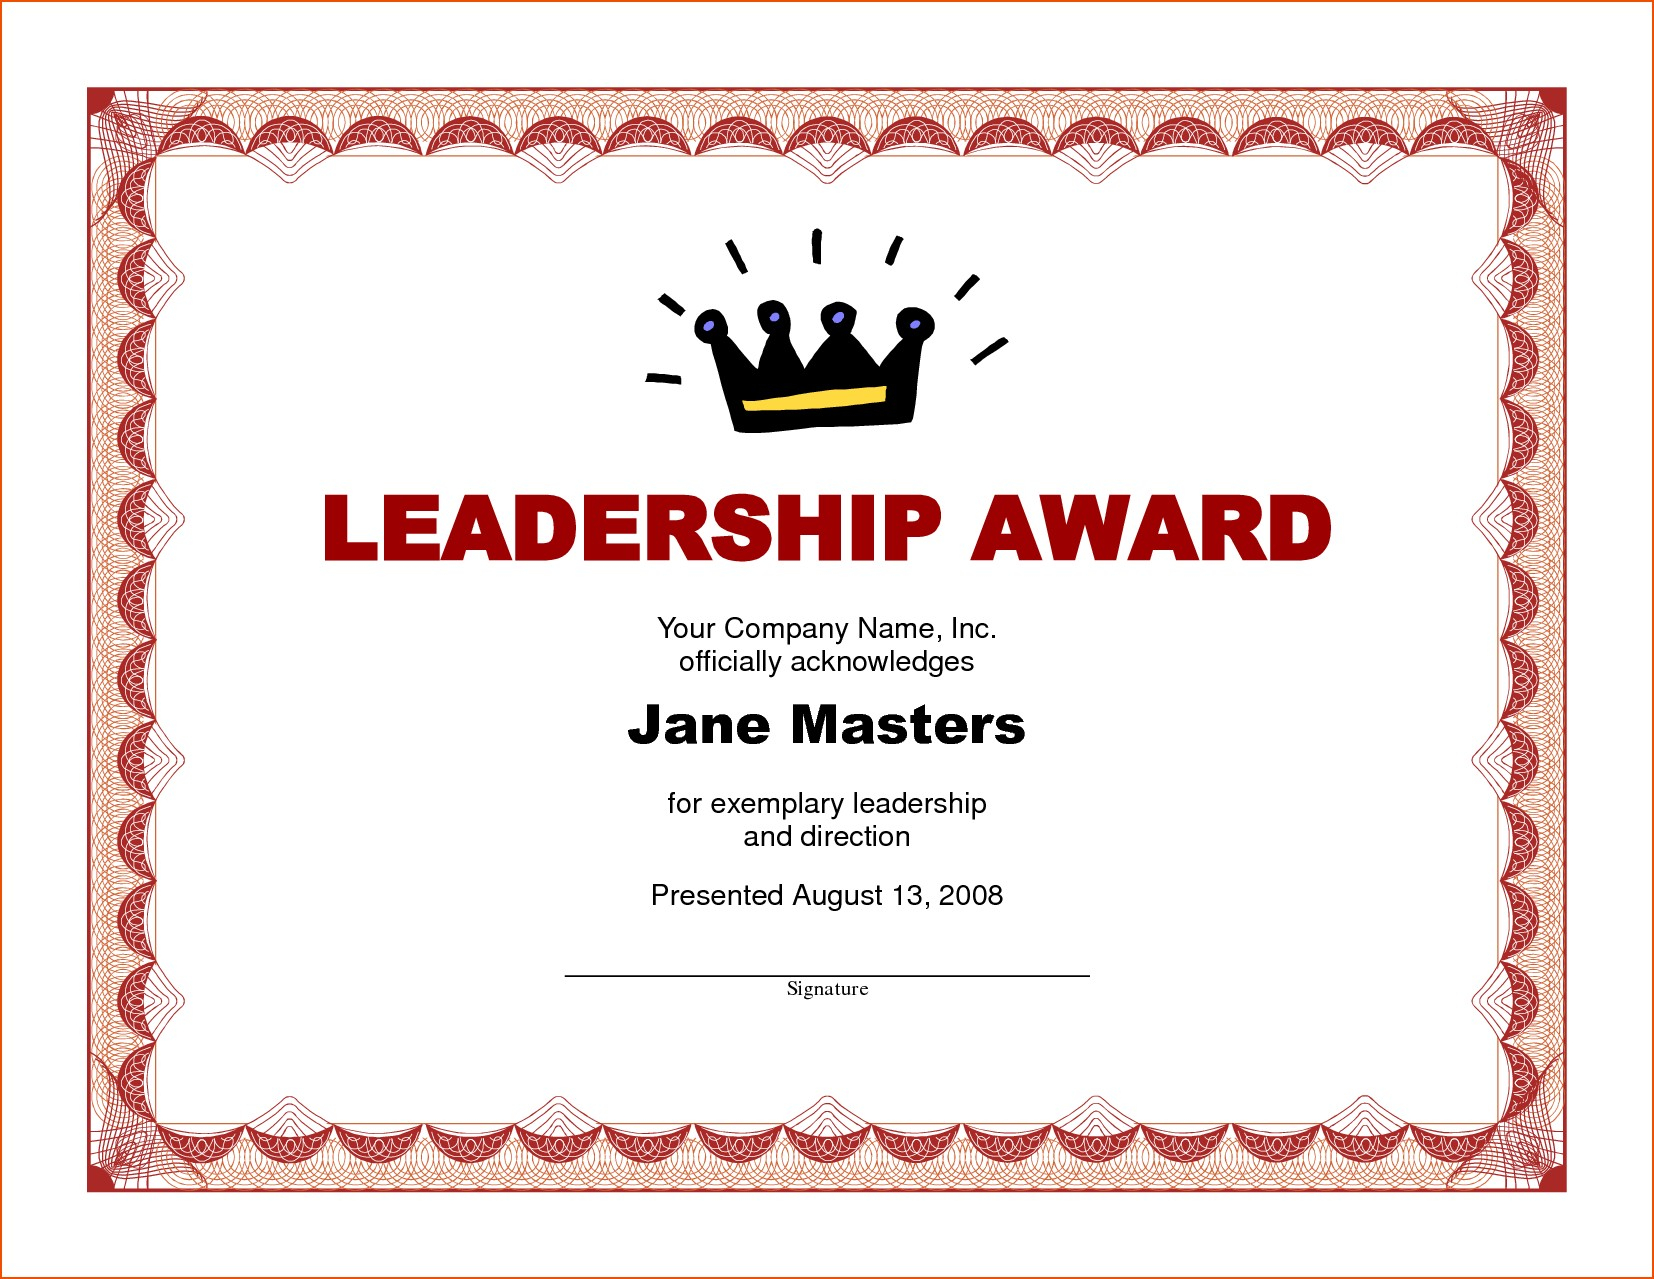 Babysitting Gift Certificate Template 12 – 1654 X 1279 For Leadership Award Certificate Template